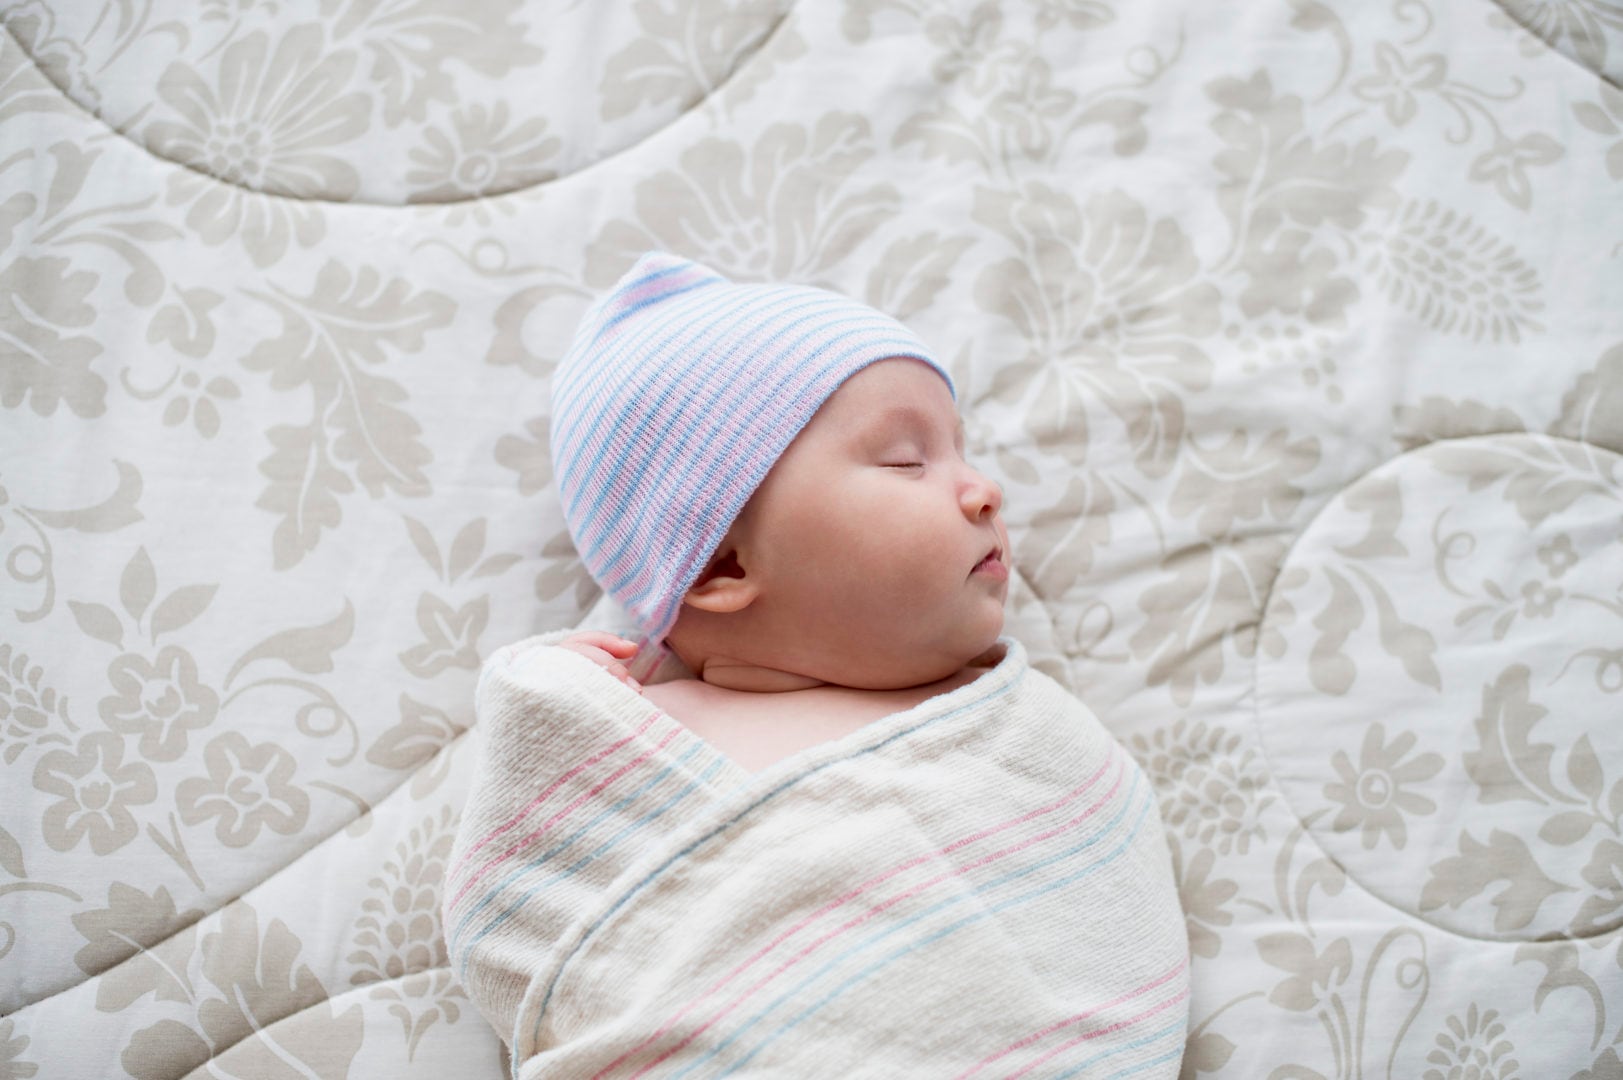 How to pick the right baby blanket size - baby blanket size chart